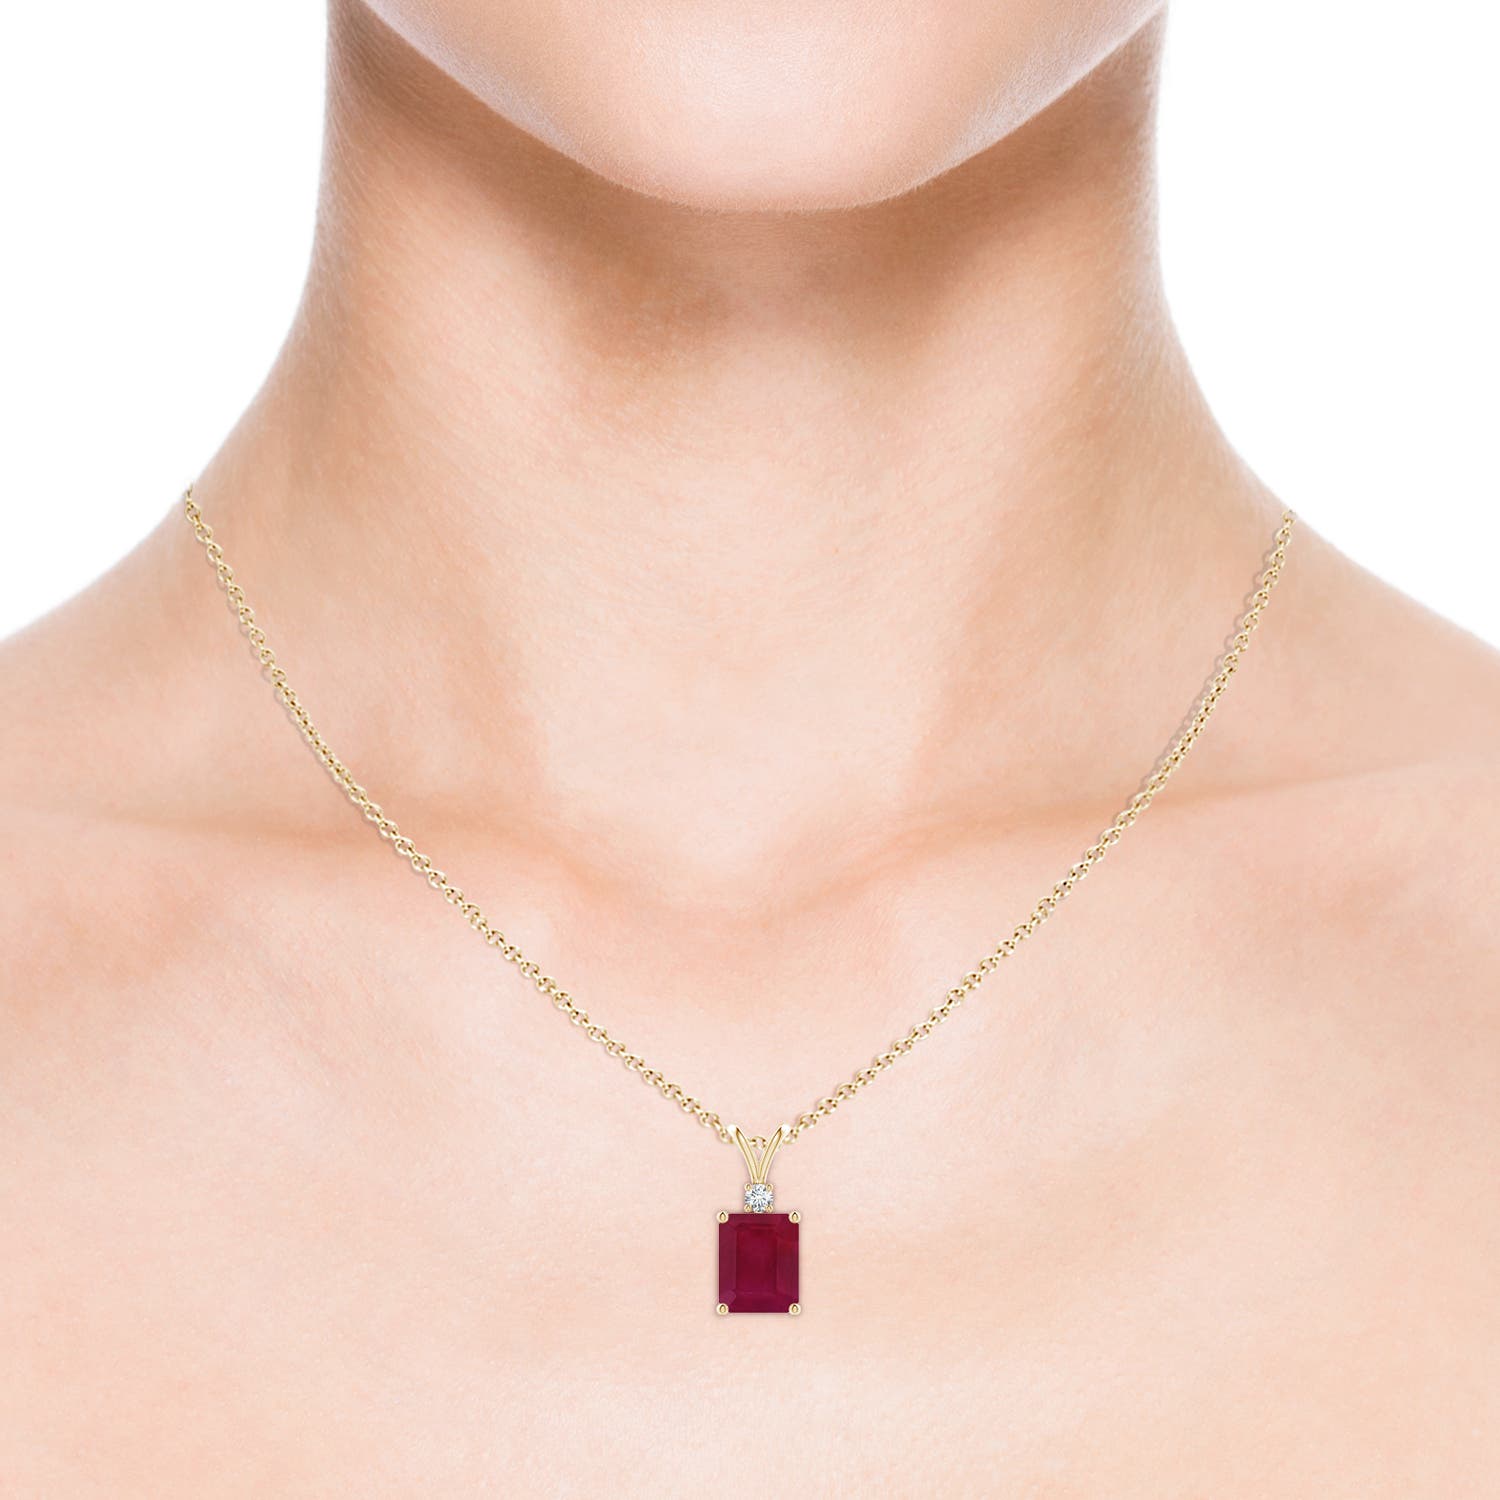 A - Ruby / 4.11 CT / 14 KT Yellow Gold